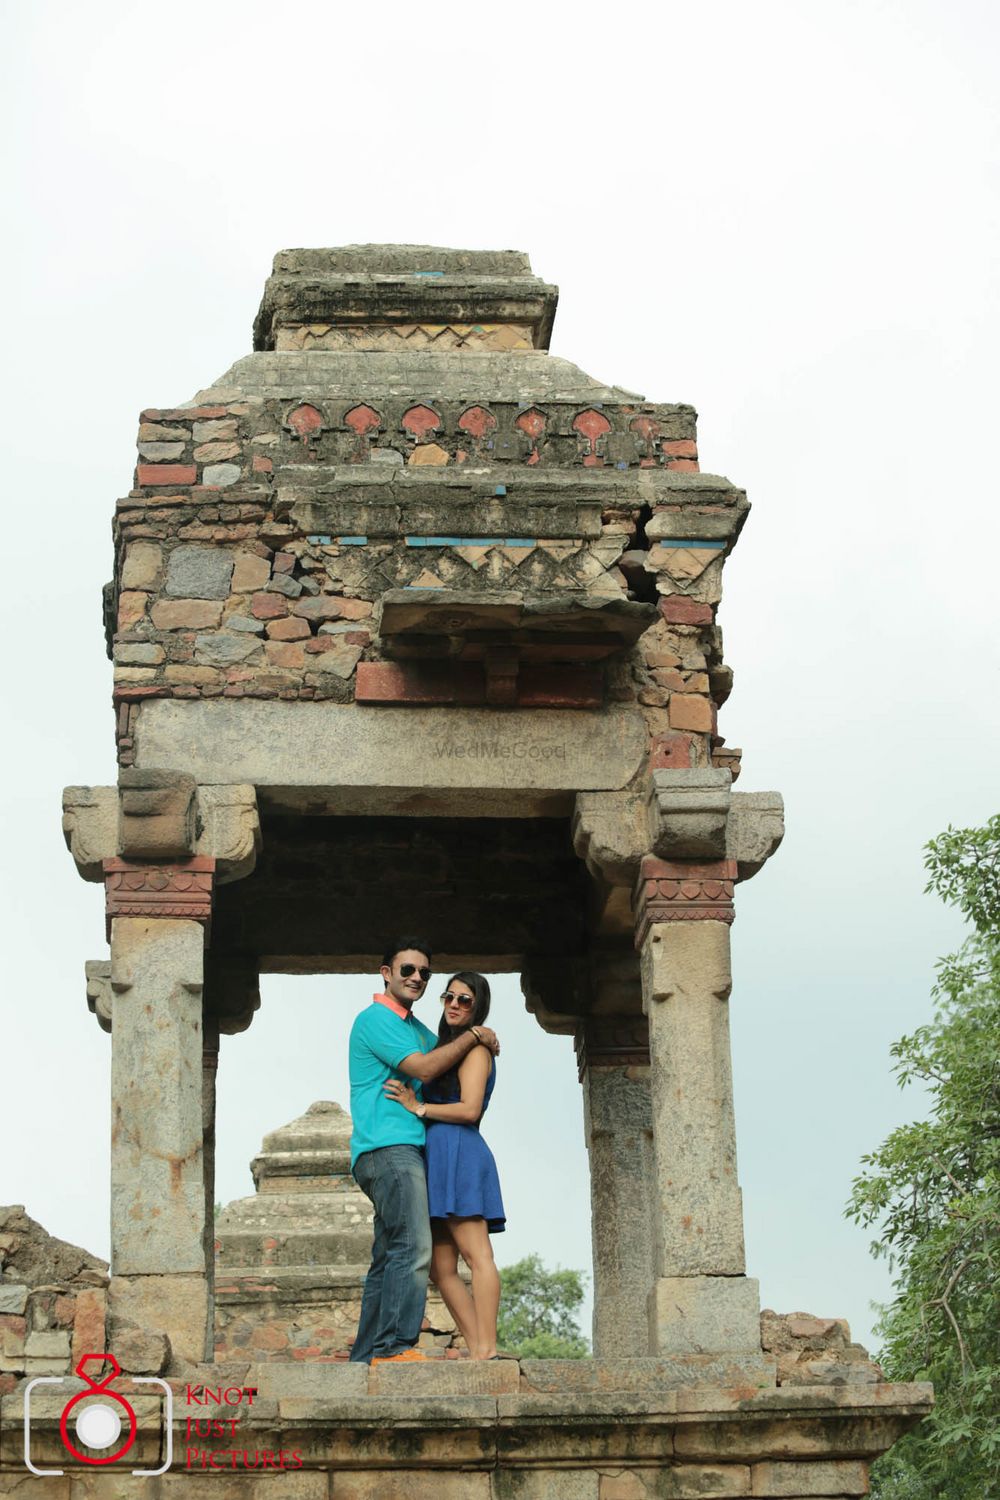 Photo From Anupriya Abhay PreWedding. - By Knot Just Pictures